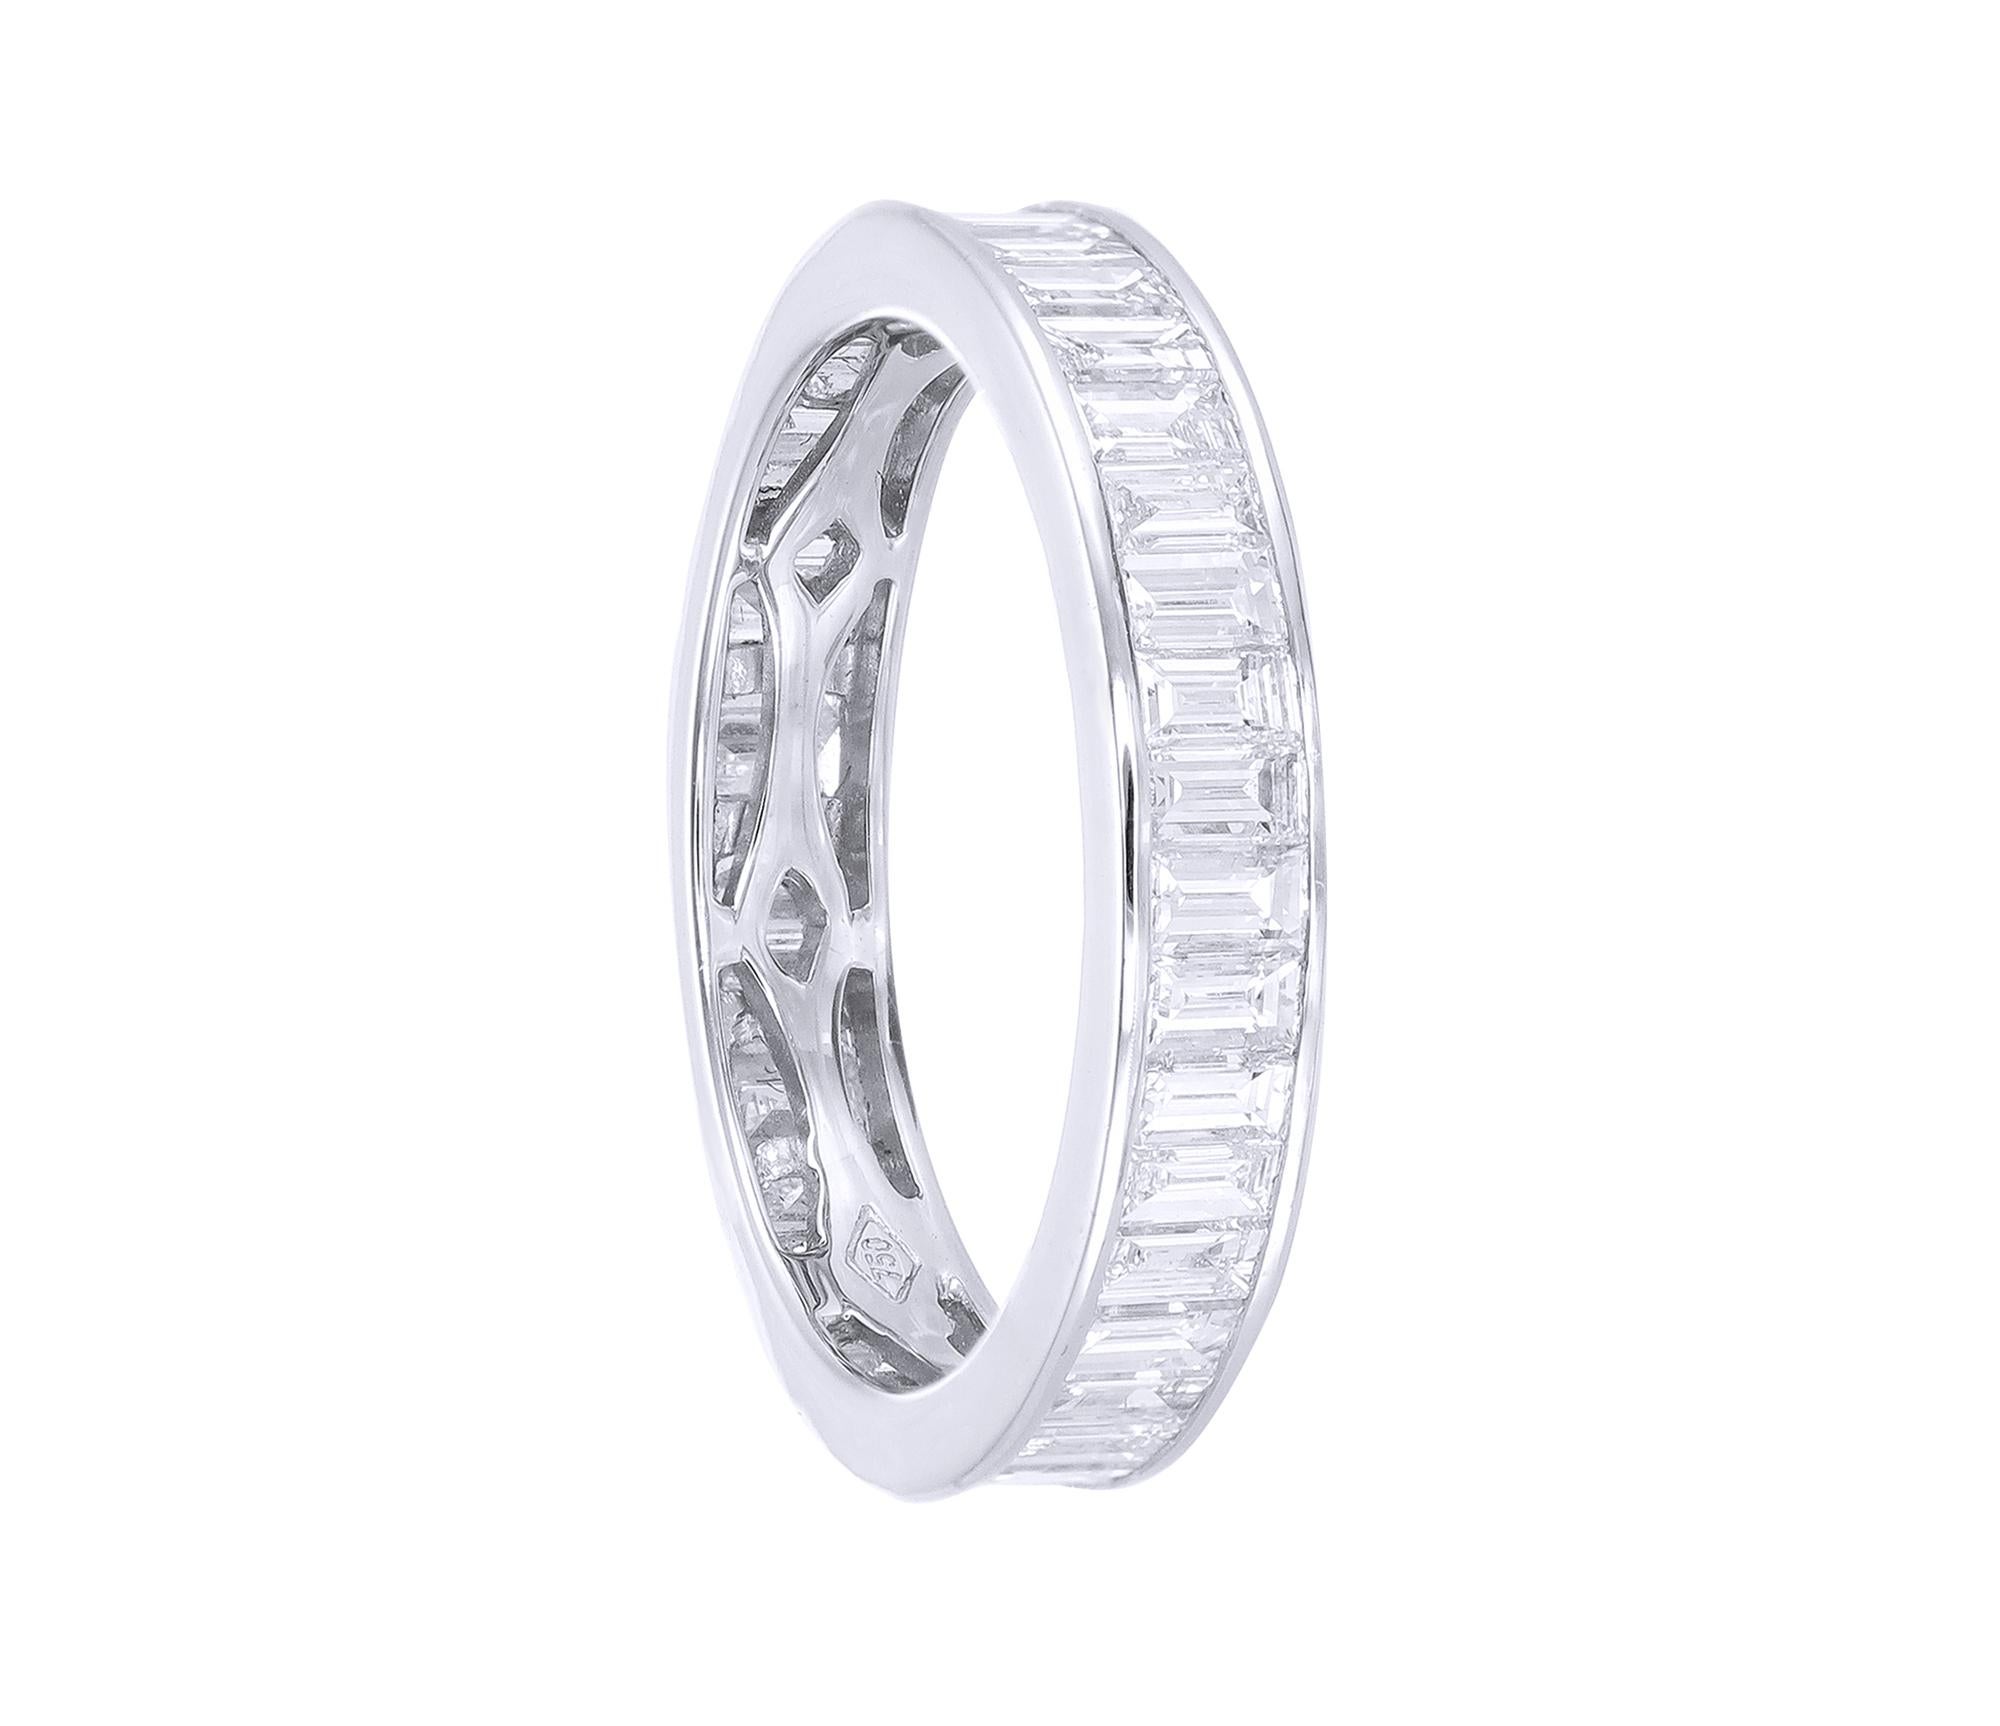 Baguette diamond wedding ring in a channel setting is a classic compliment to any engagement ring. This timeless band can be worn with the matching engagement rings as well as stacked with complimentary rings.

Our diamonds are graded as G-H color